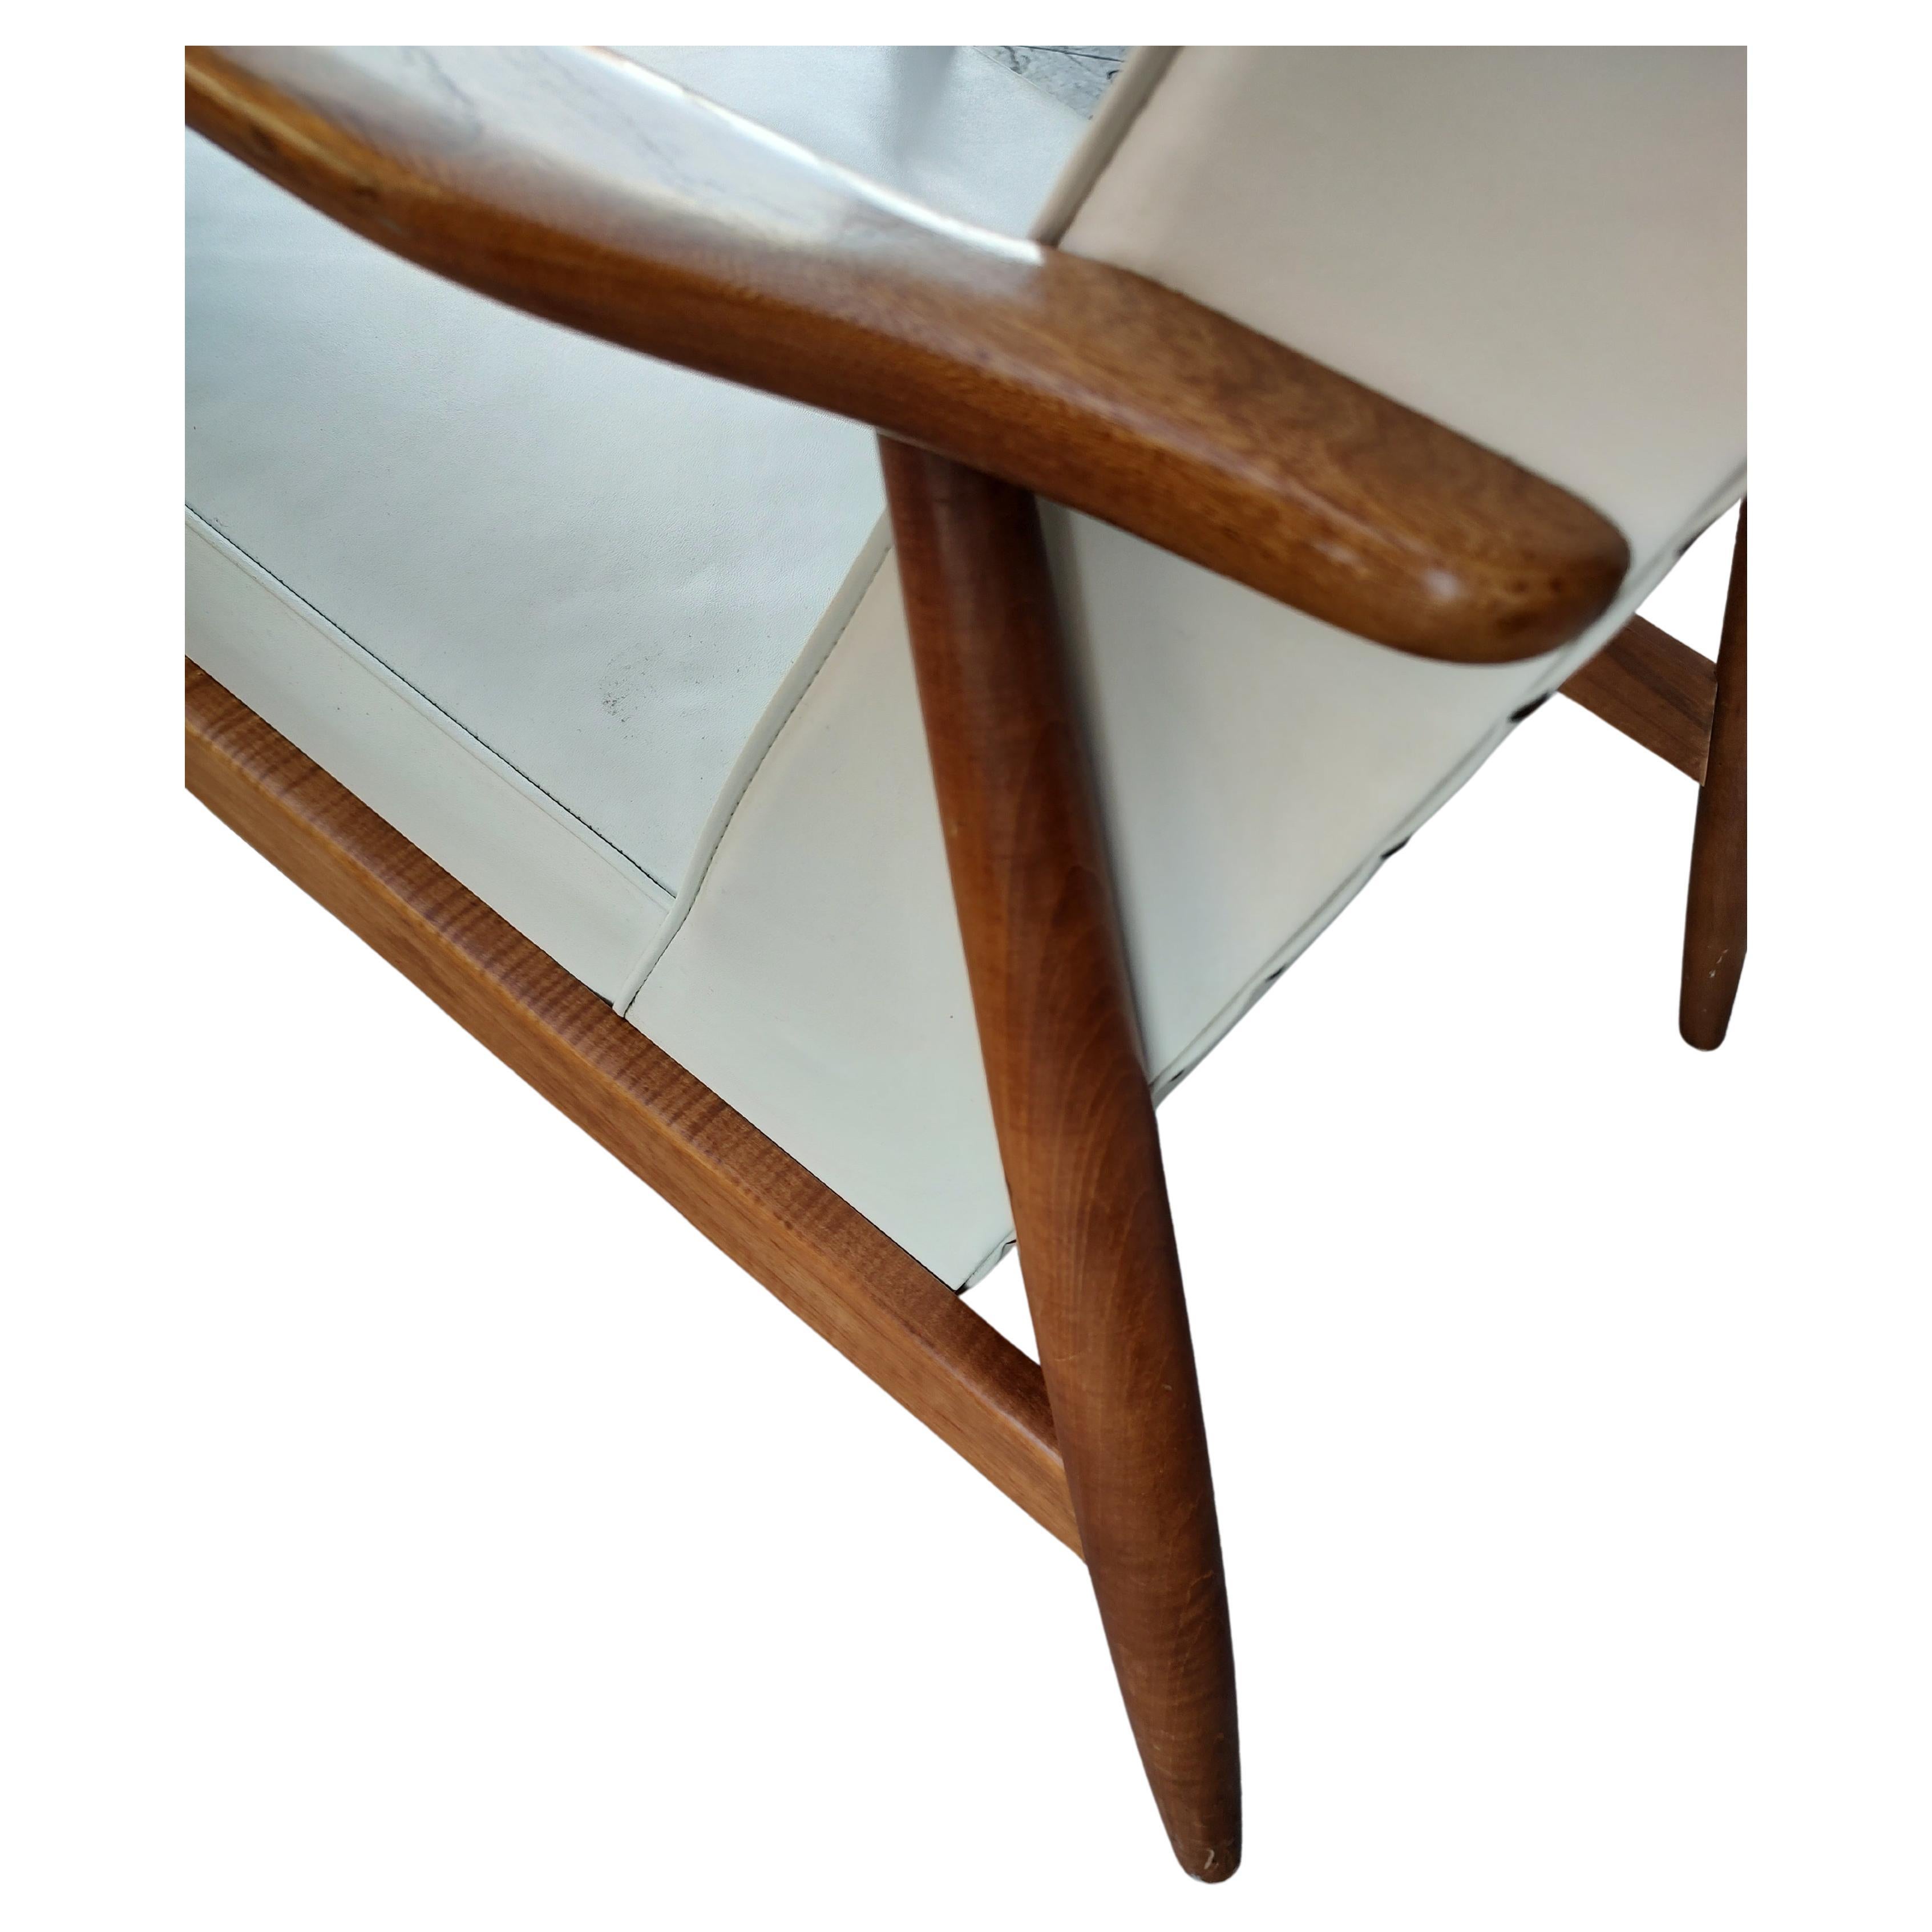 Simple and elegant and in excellent vintage condition. Naugahyde remains in top condition and is quite comfy and stylish. Walnut frame is also in like new condition.